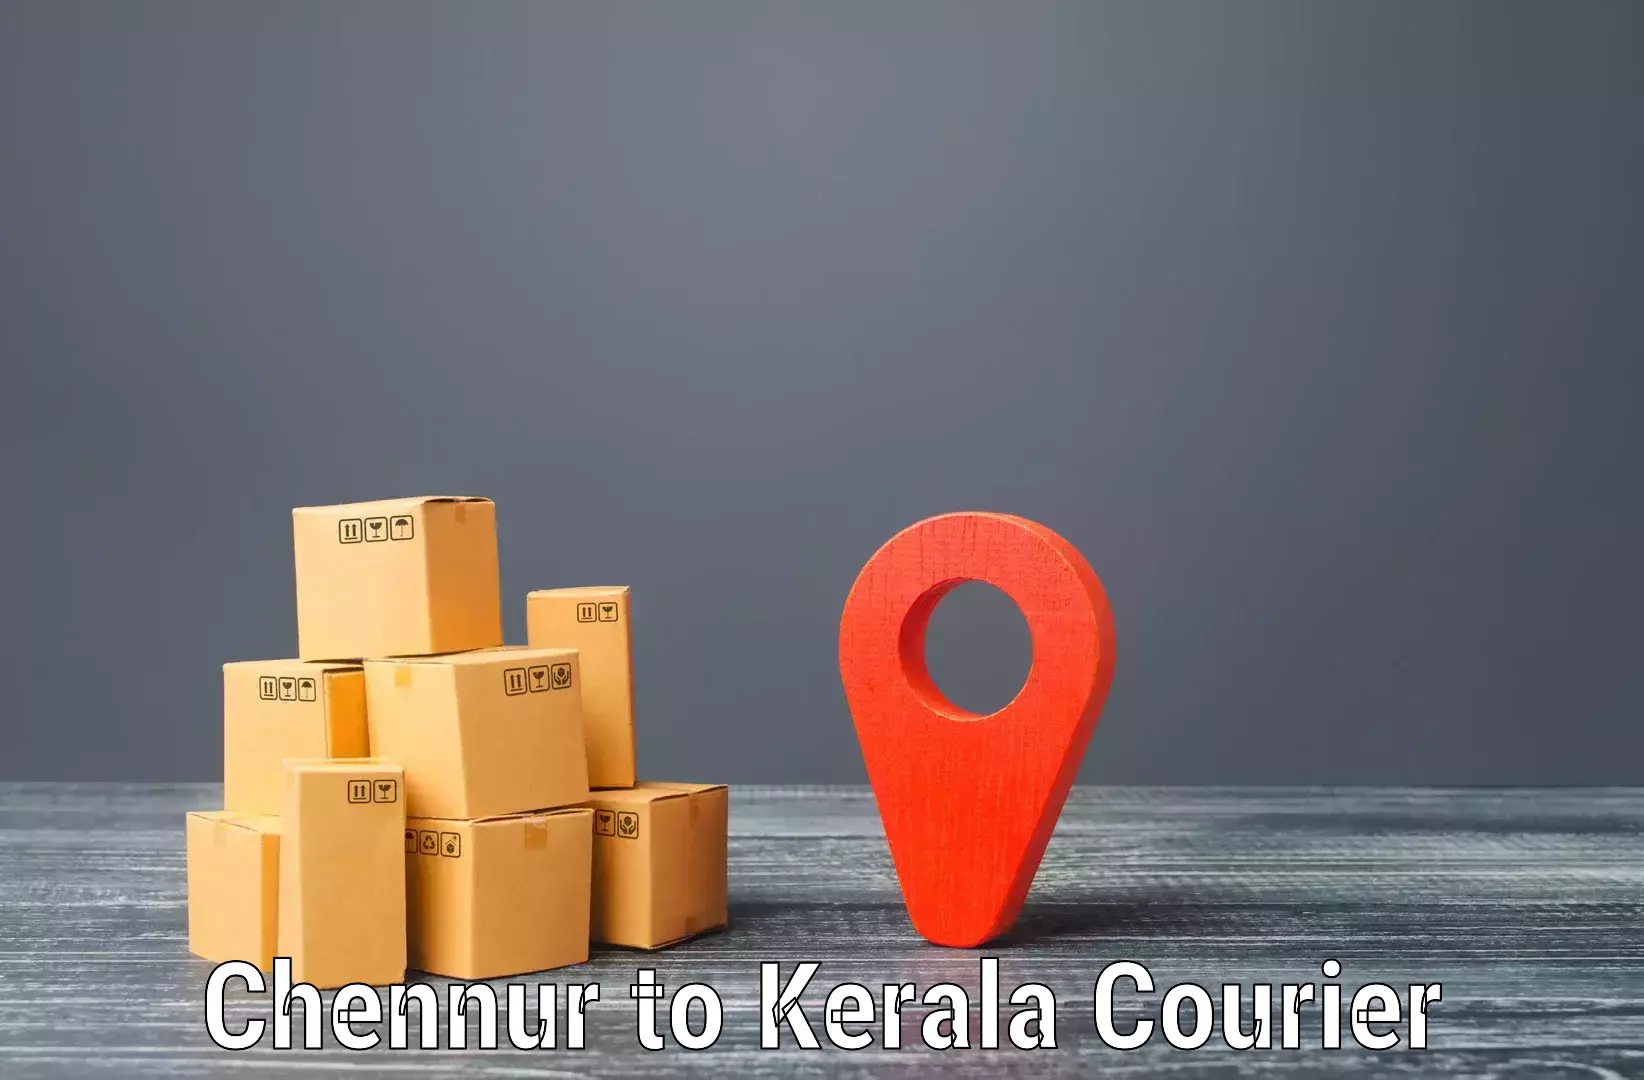 Reliable delivery network Chennur to Anjumoorthy